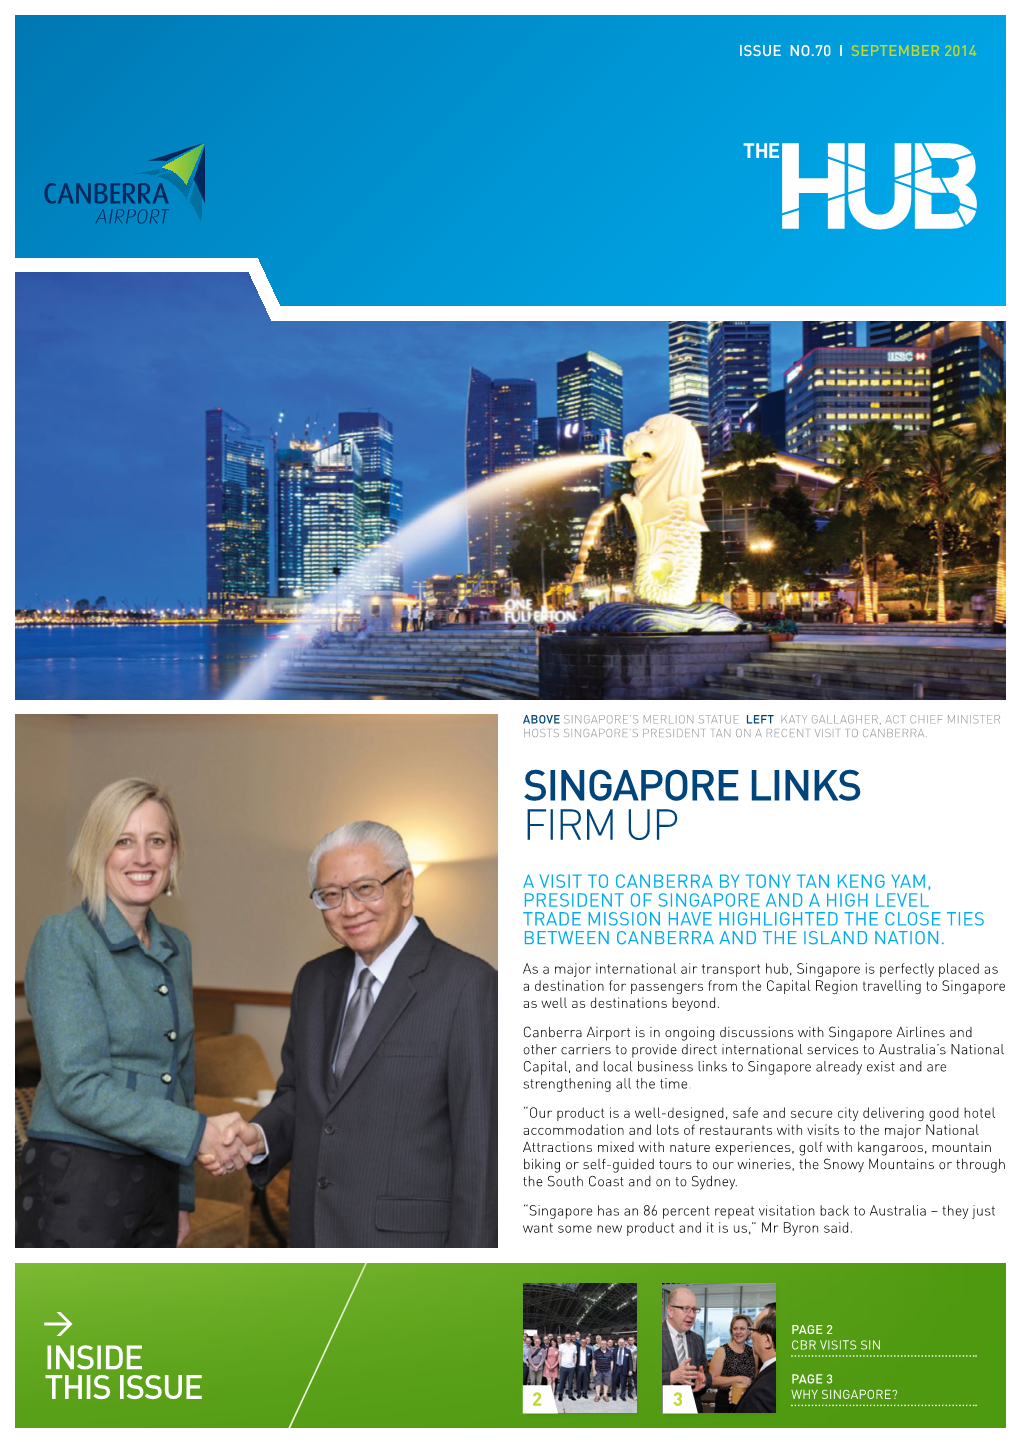 Singapore Links Firm Up